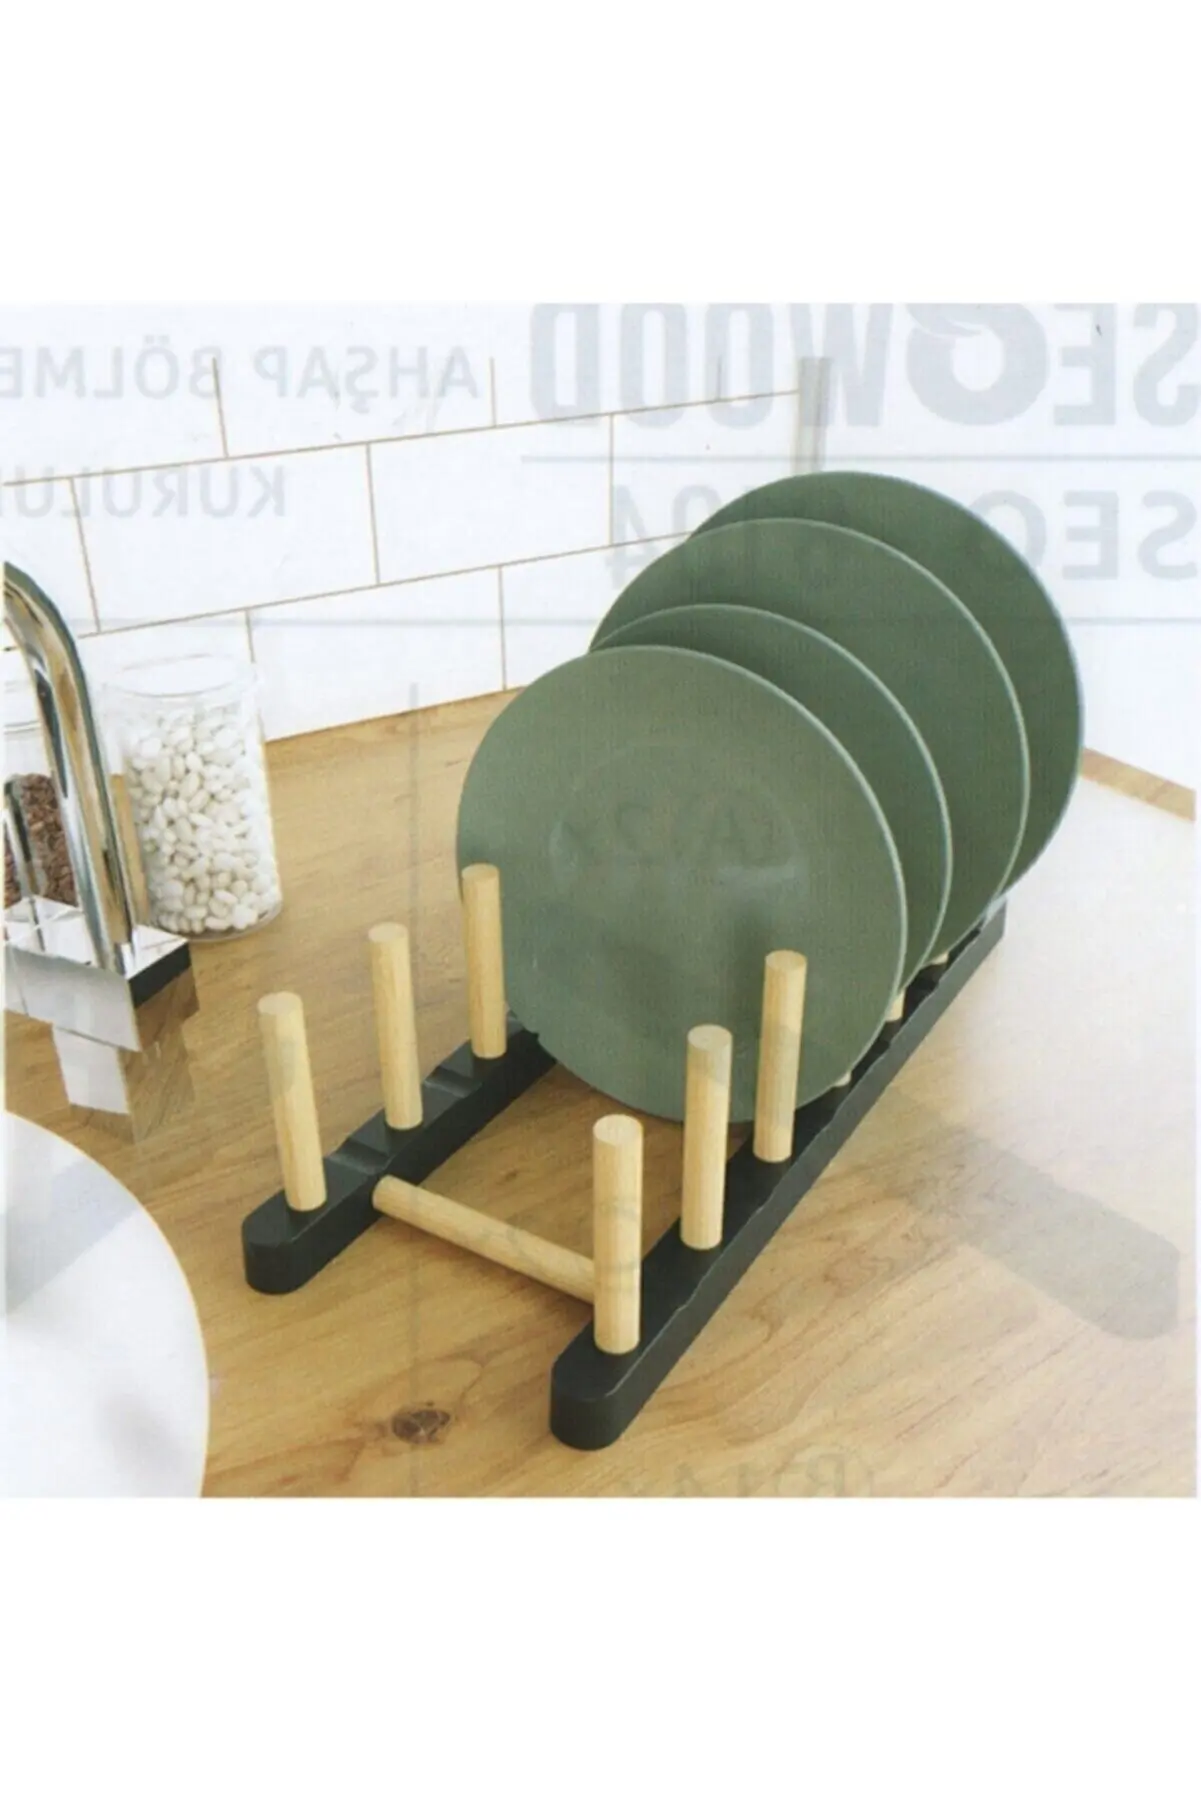 

Kitchen Accessories Storage Rack Wooden Divided Plate Stand 6 Compartments Organizer Plates Holder Closet Shelf Dish Drying Rack